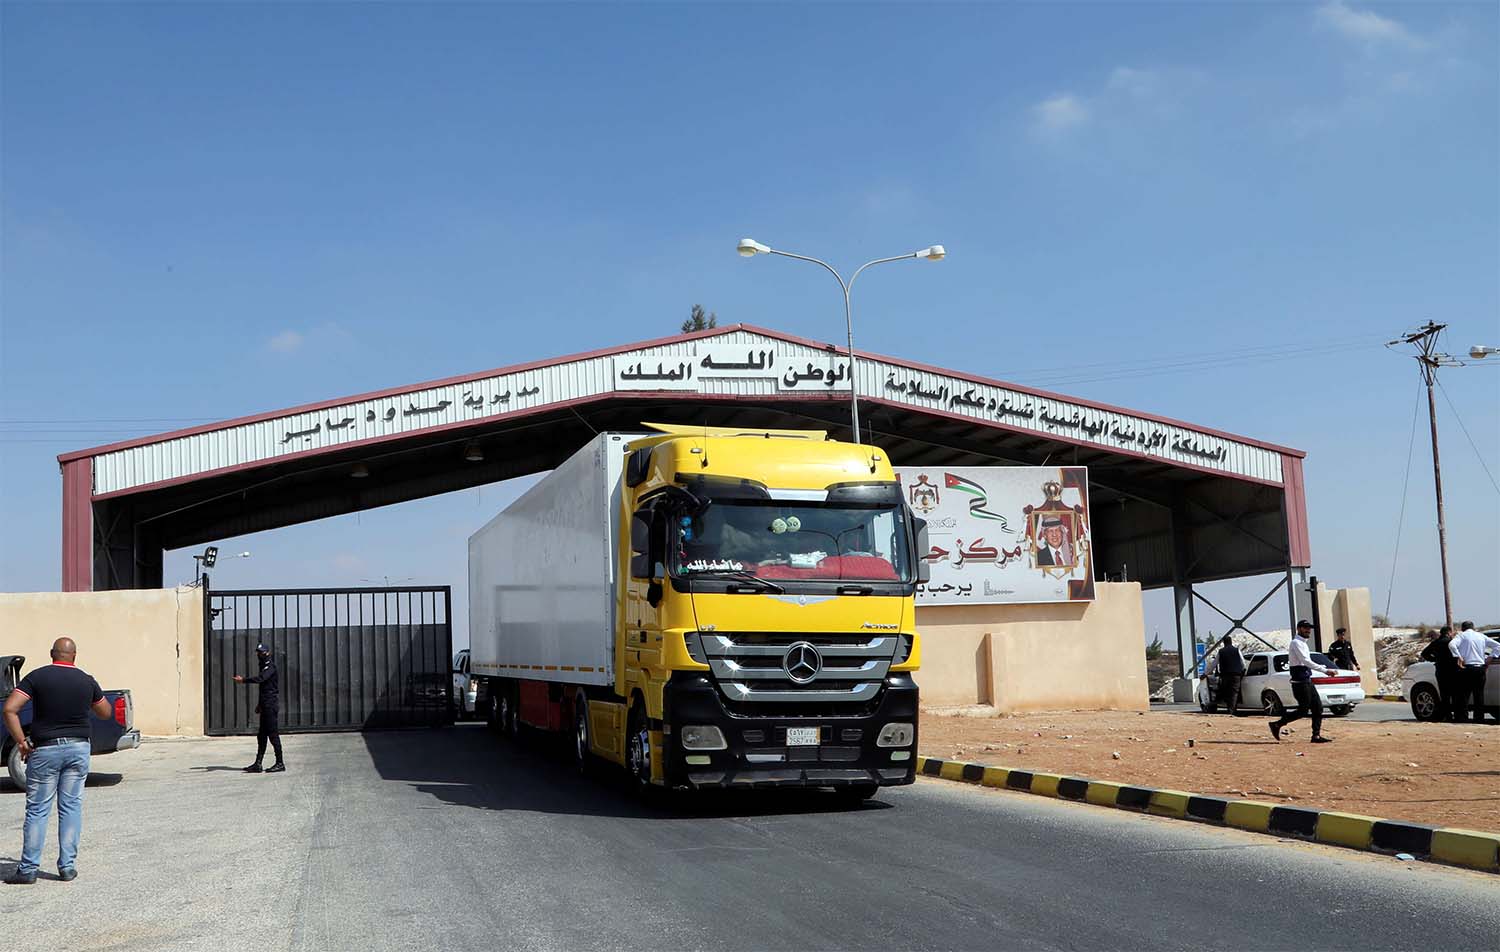 Officials in Jordan and Lebanon have urged the US to ease sanctions on Syria to facilitate trade